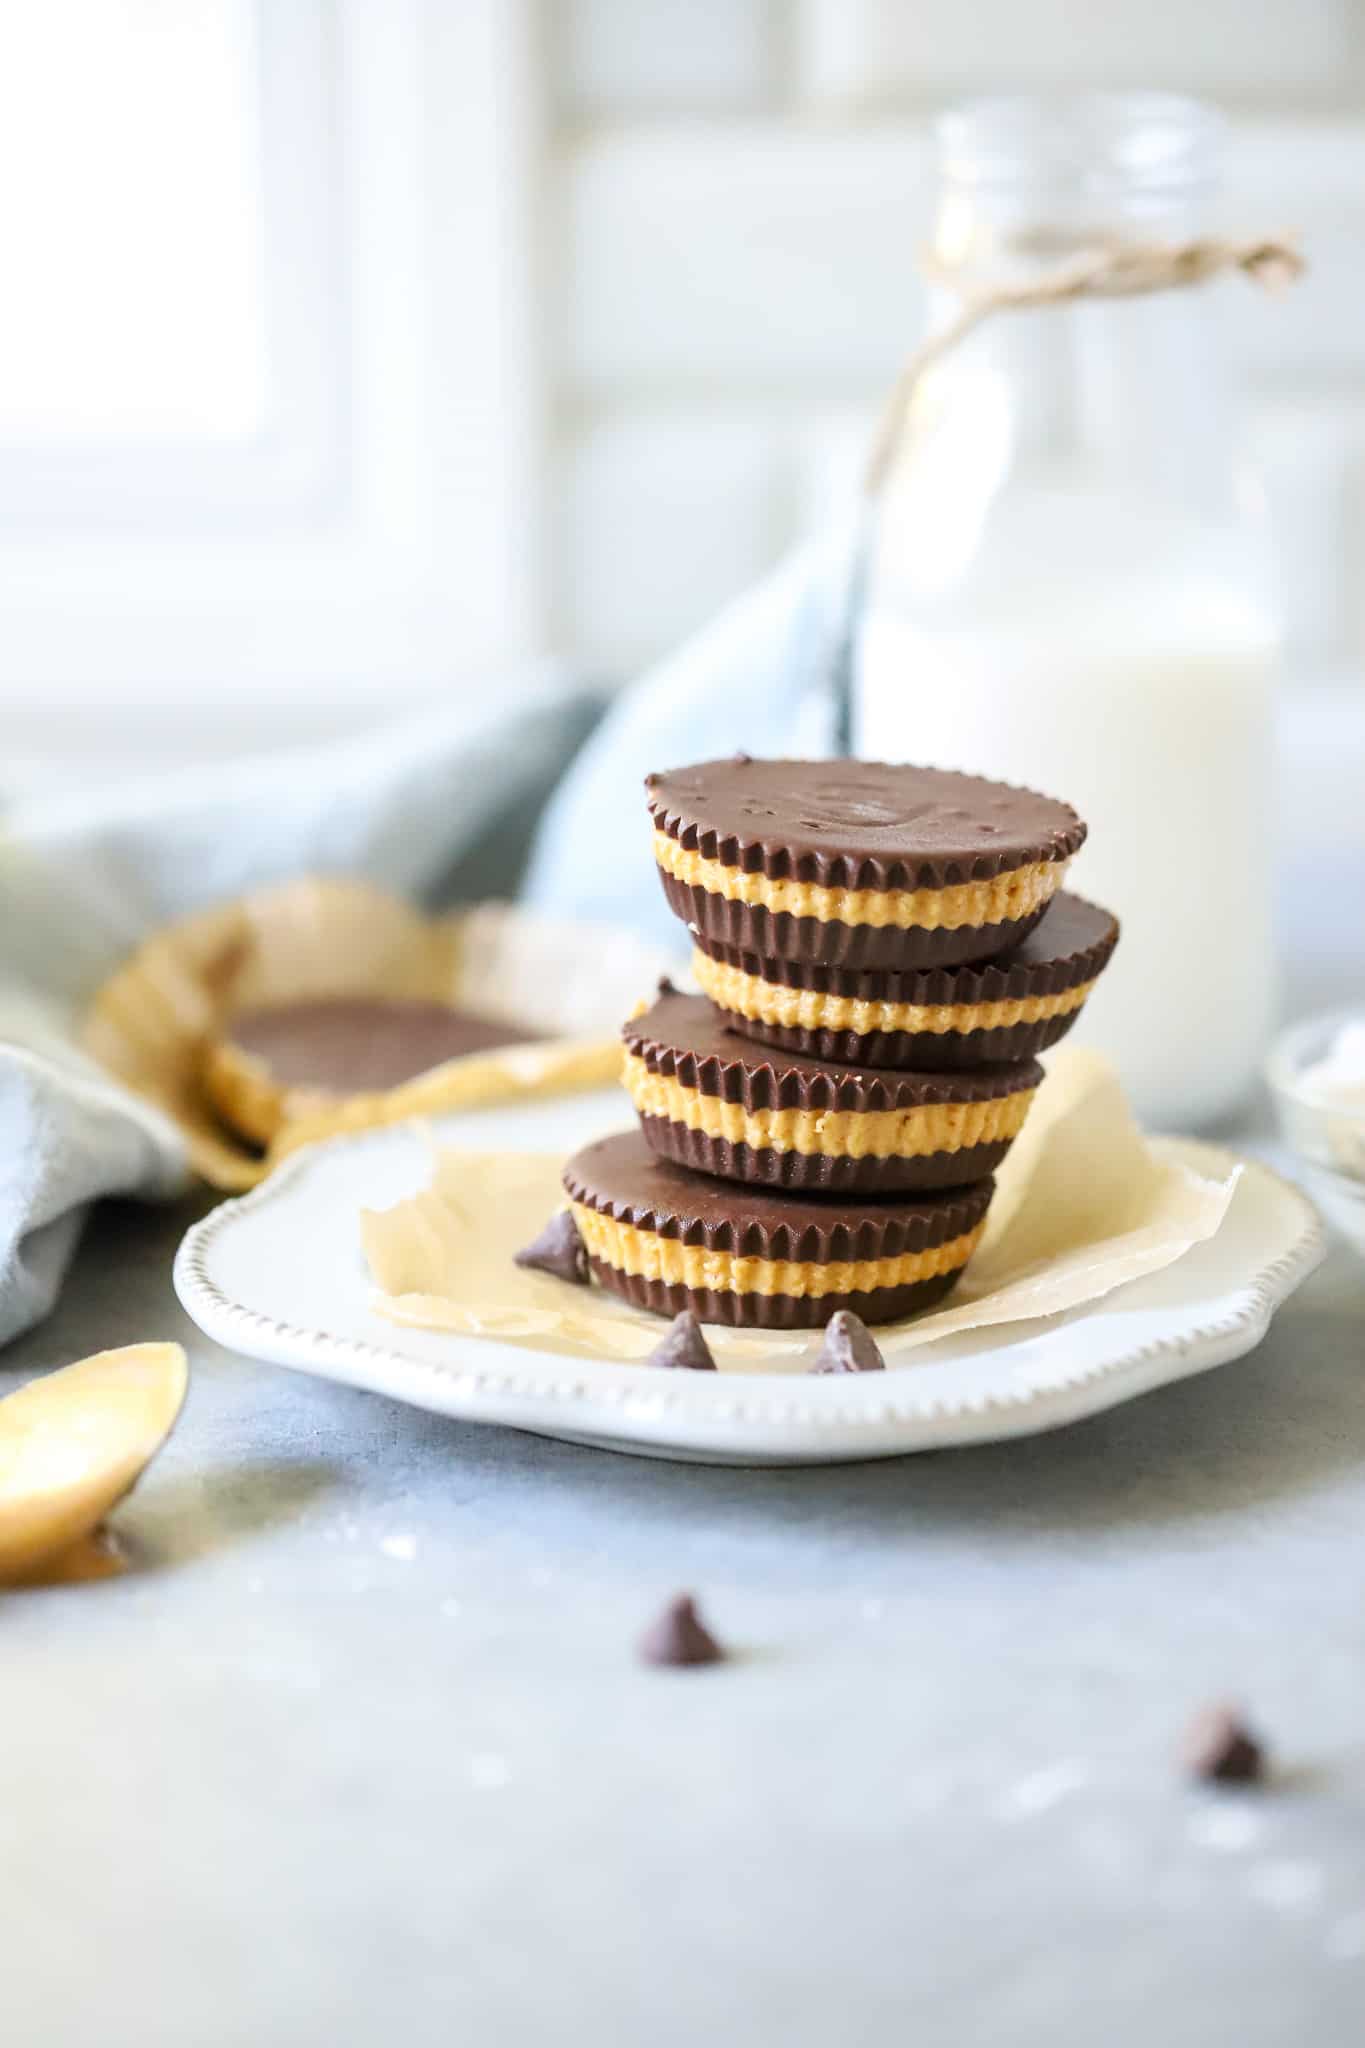 Homemade Peanut Butter Cups on white plate with glass of milk